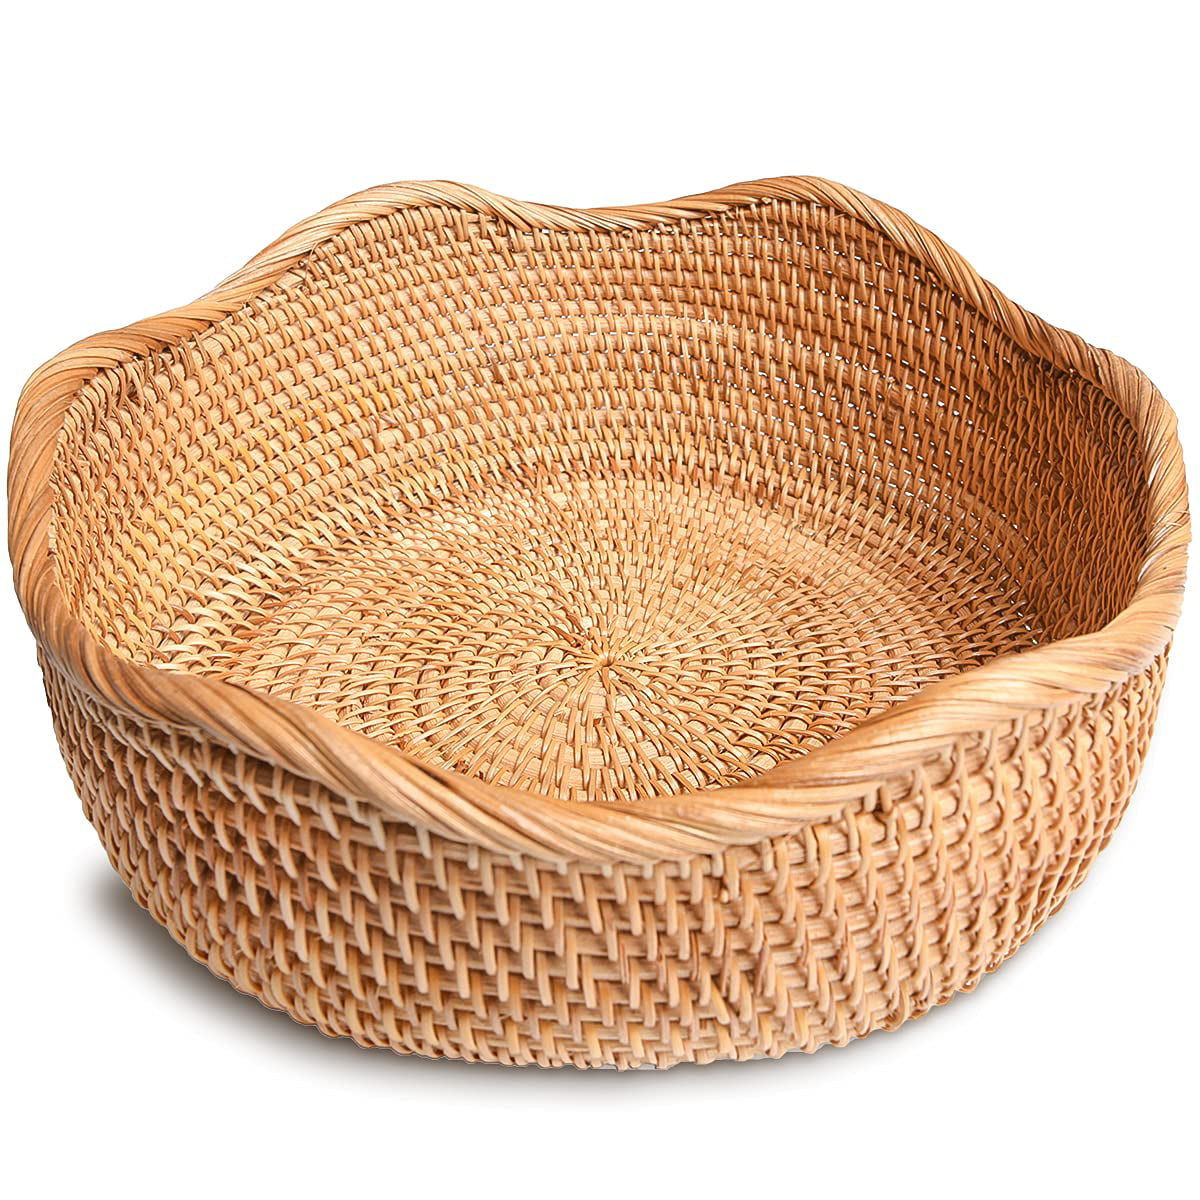 Large Wooden Handmade Bowl With Handle Large Handmade Bowl With Handle Large Handmade Basket Large Handmade Wooden Basket